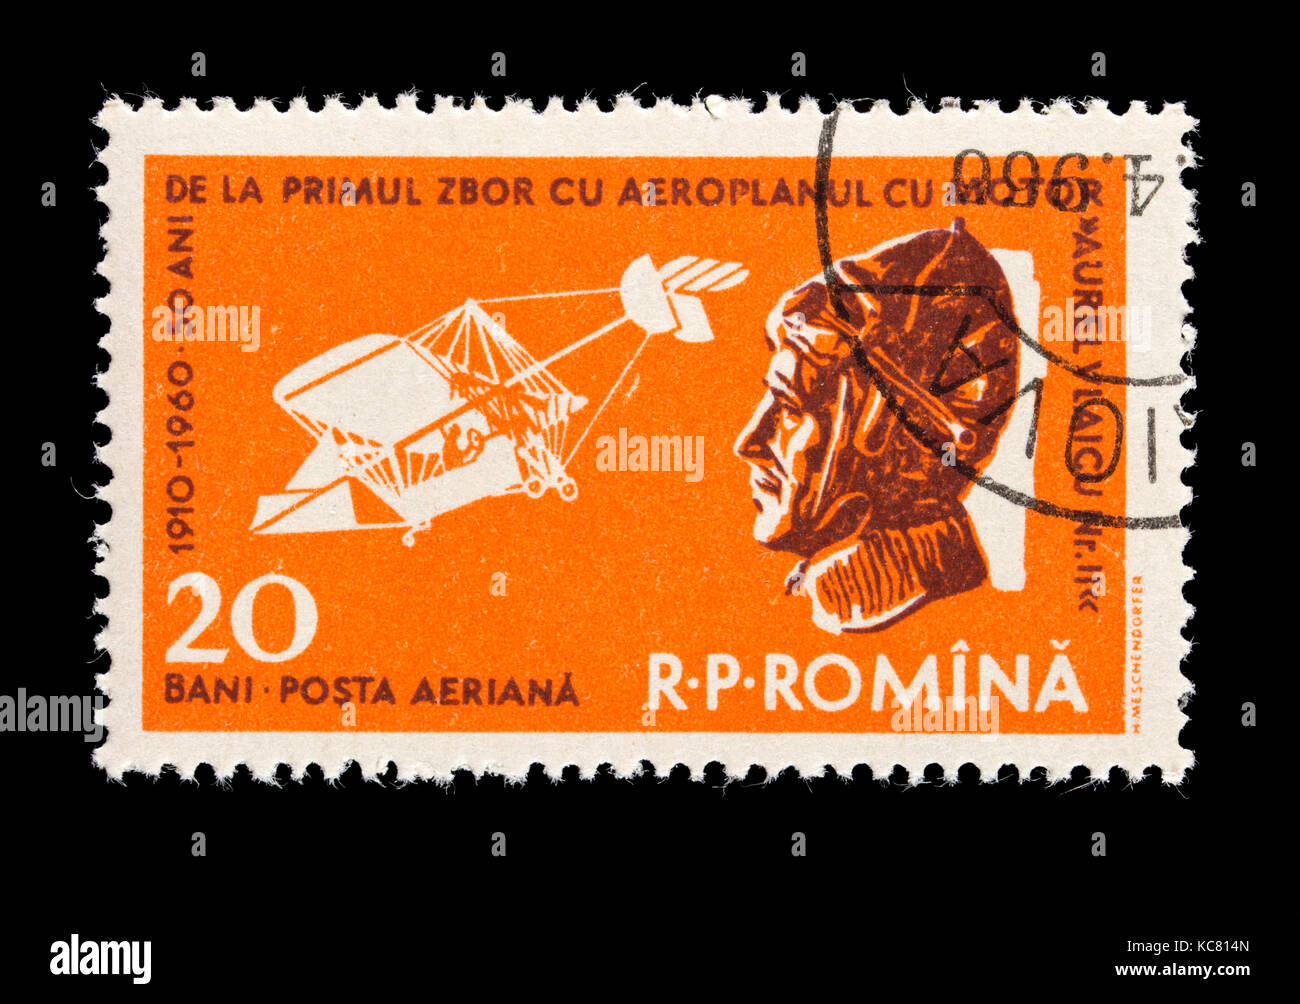 Postage stamp from Romania depicting Aurel Vlaicu and early plane, Romanian aviation pioneer. Stock Photo